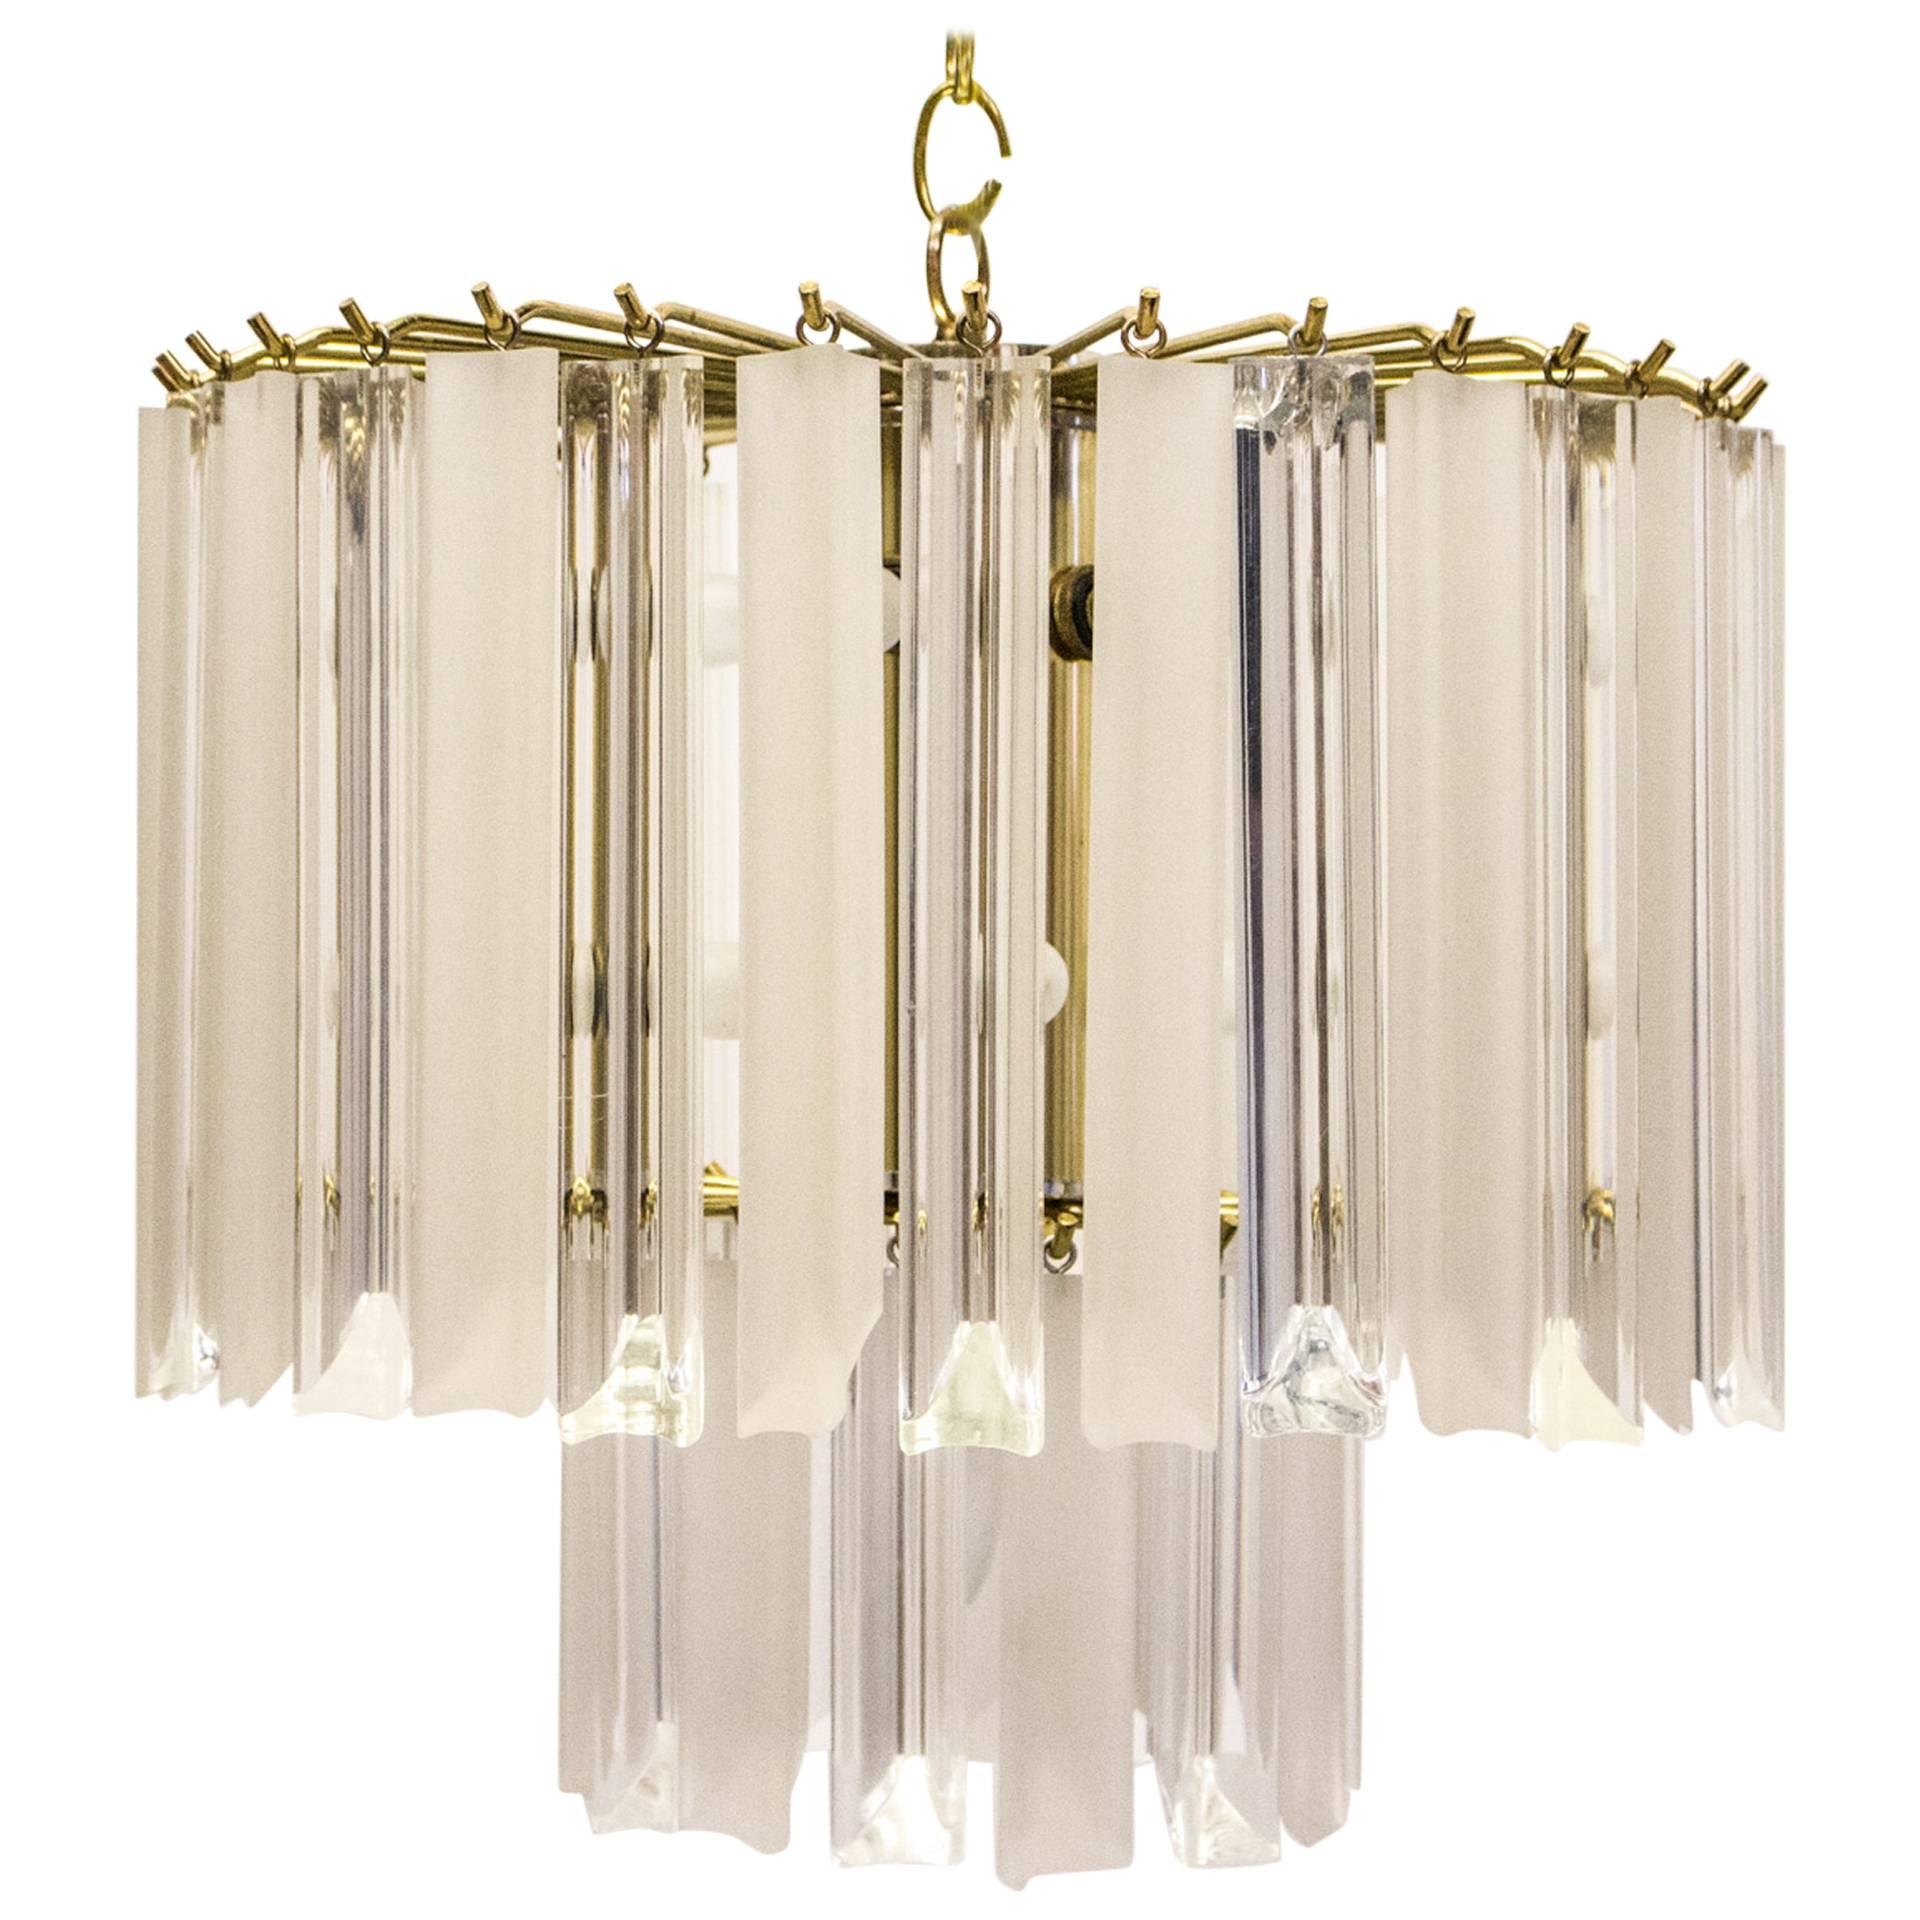 Glistening Lucite Chandelier from the 1980s